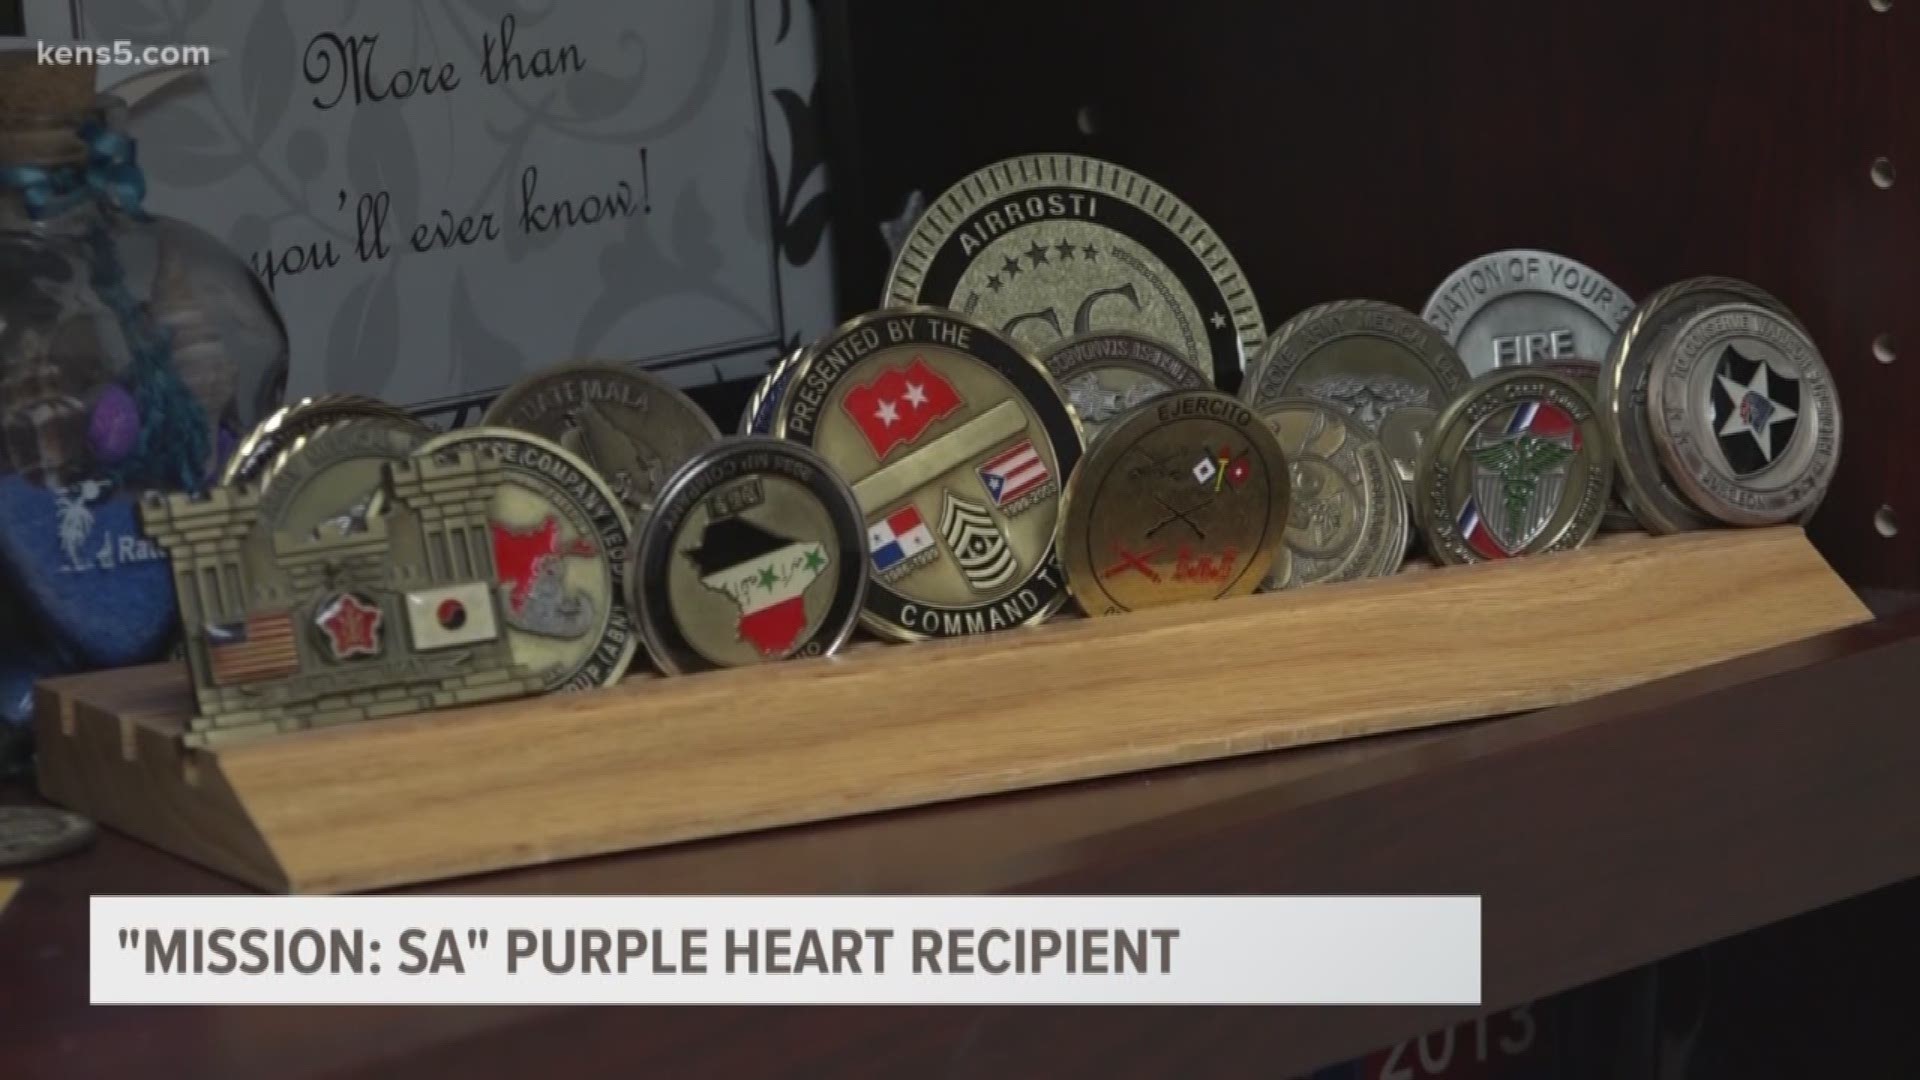 An Army veteran who helped save lives in Dessert Storm receives a purple heart. He now has a new mission of giving back in San Antonio.